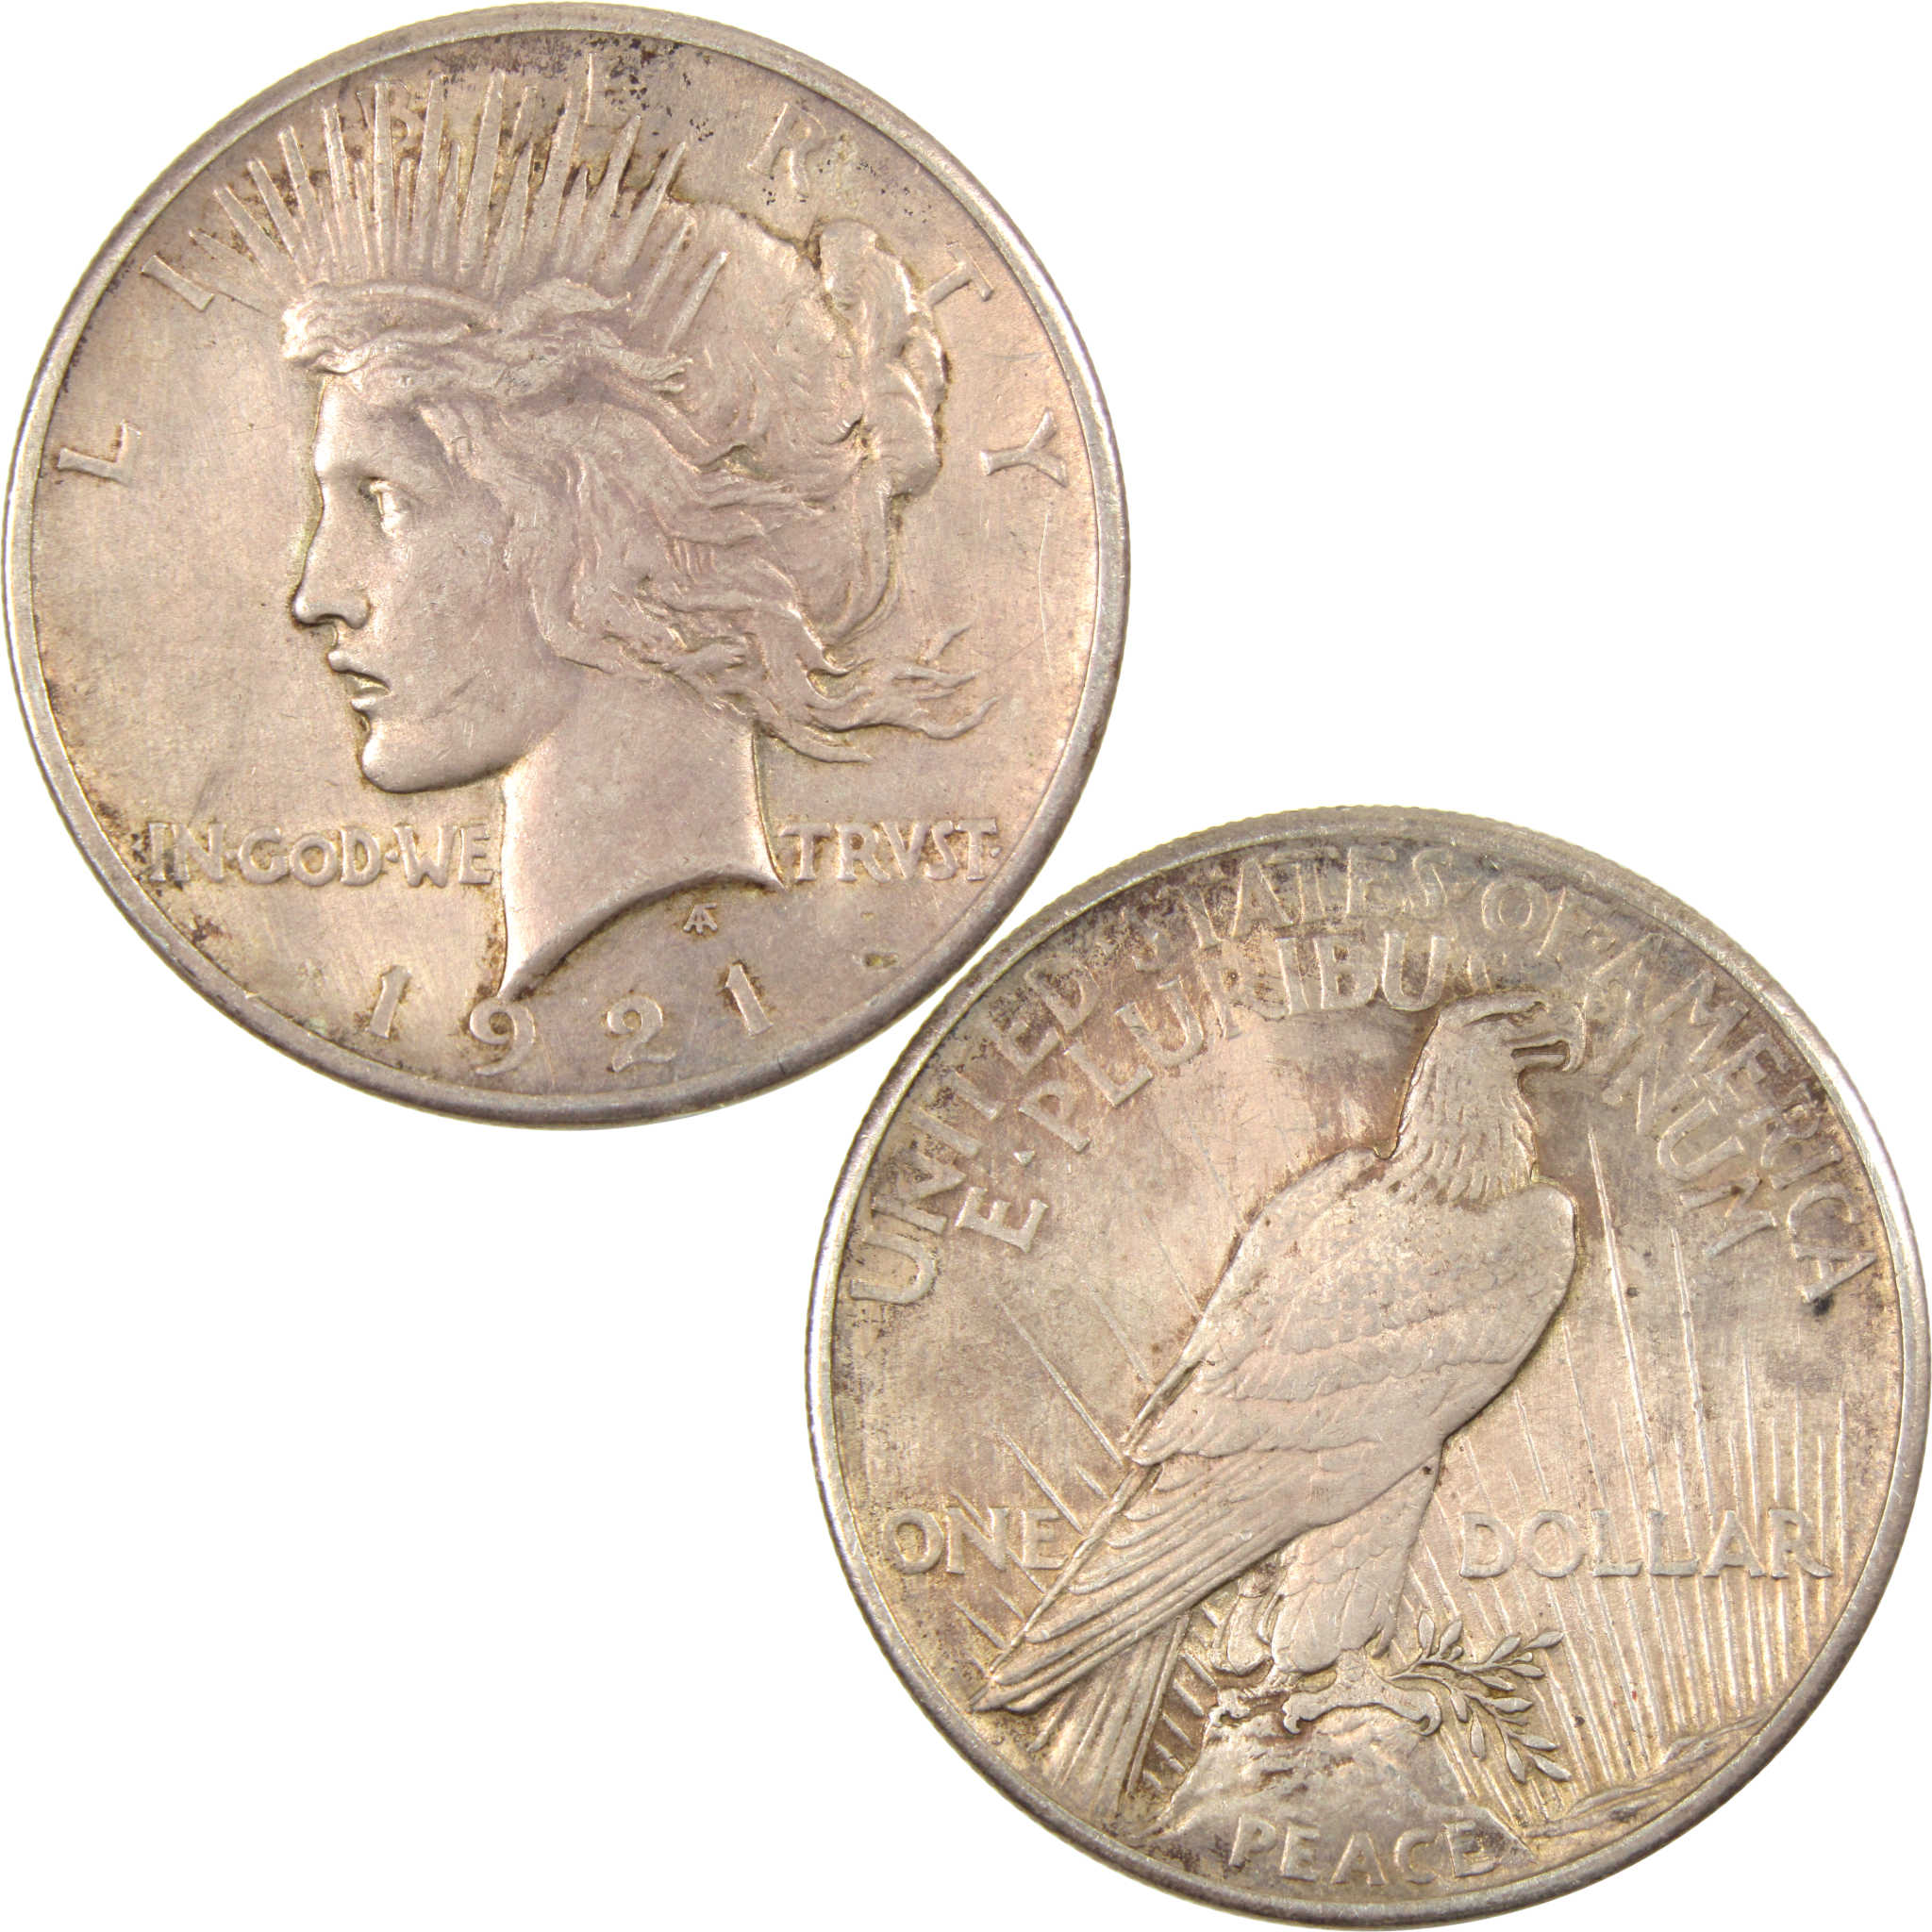 1921 High Relief Peace Dollar XF Details 90% Silver $1 Coin SKU:I4130